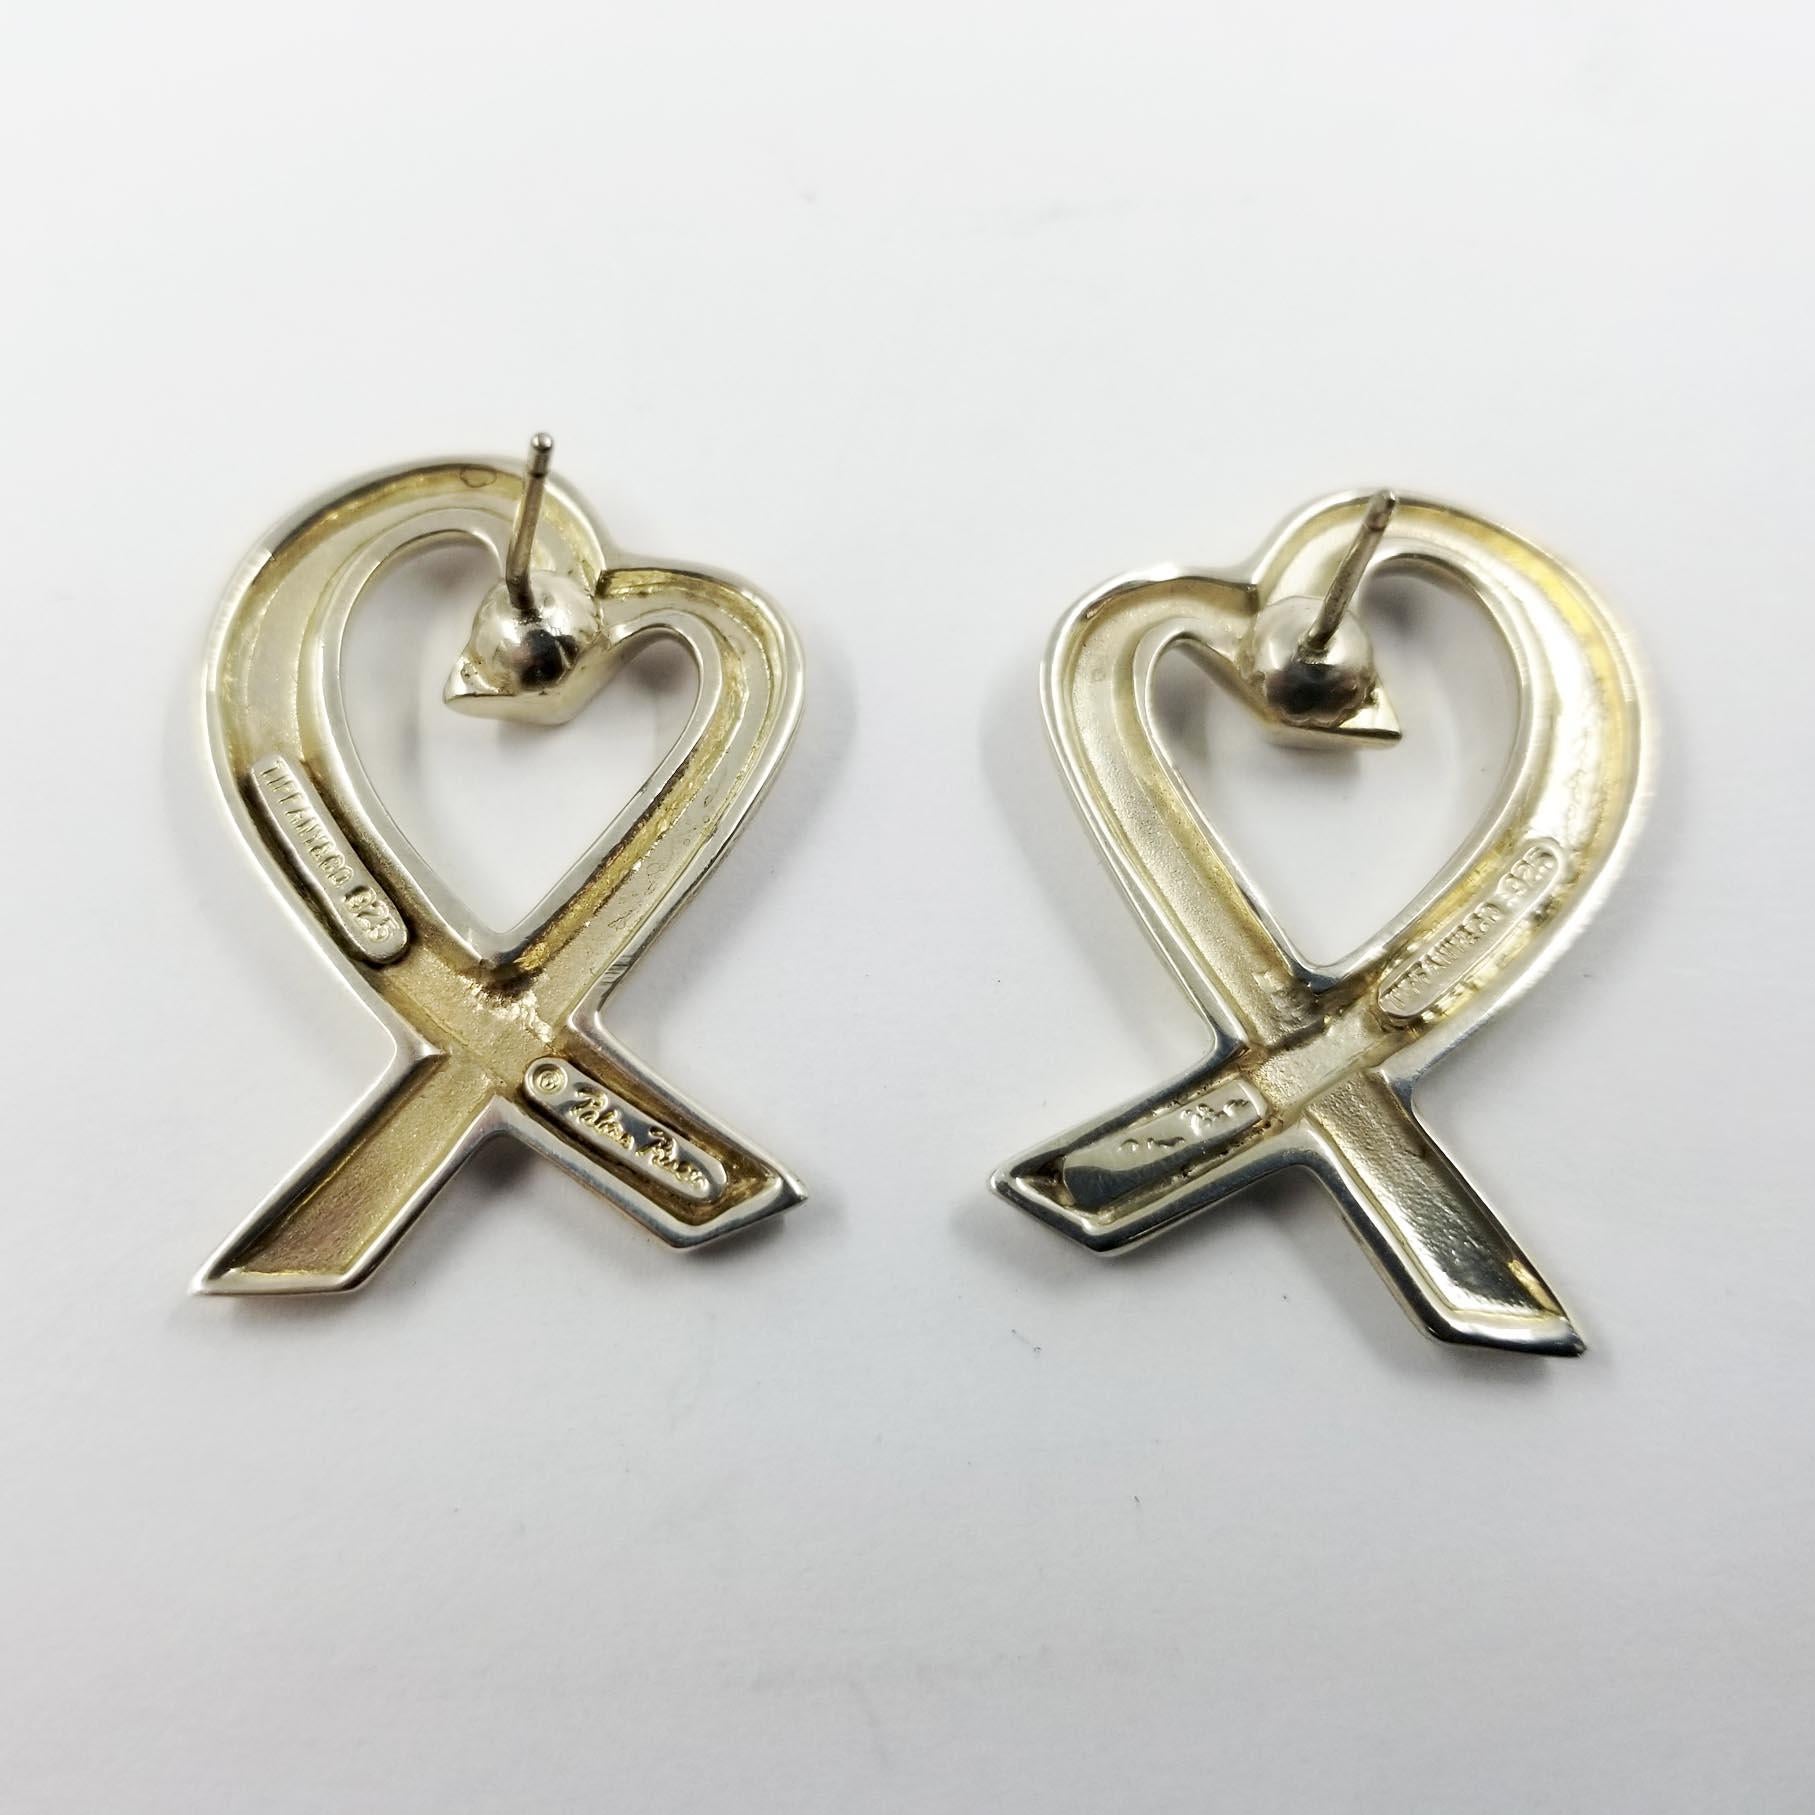 These large stud earrings are designed by Paloma Picasso for Tiffany & Co. The hearts are crafted in sterling silver. The backs are engraved with Paloma Picasso's signature, Tiffany & Co, and 925. Post with friction nut. Professionally polished to